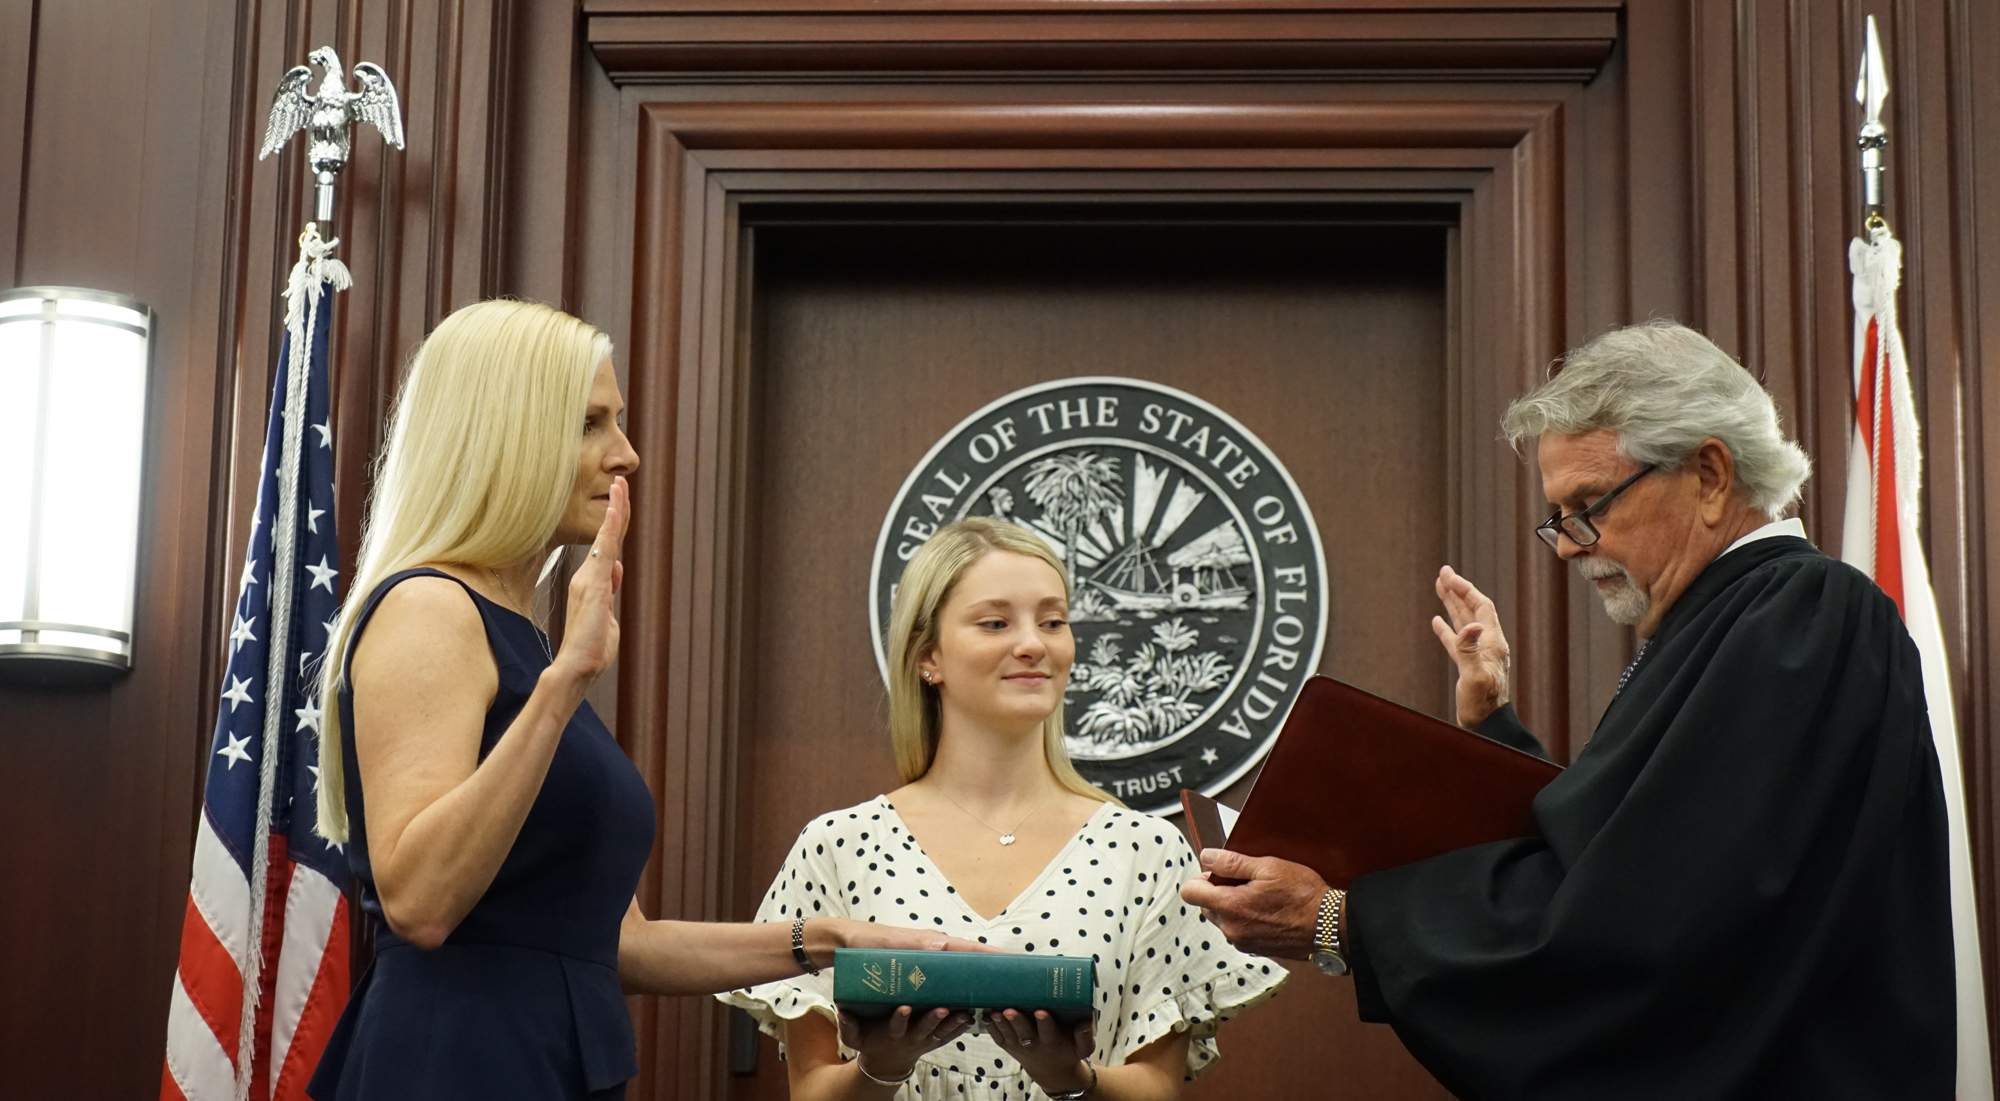 Duval County Judge Julie Taylor is sworn in by 4th Circuit Chief Judge Mark Mahon with her daughter, Shelby, holding the Bible.